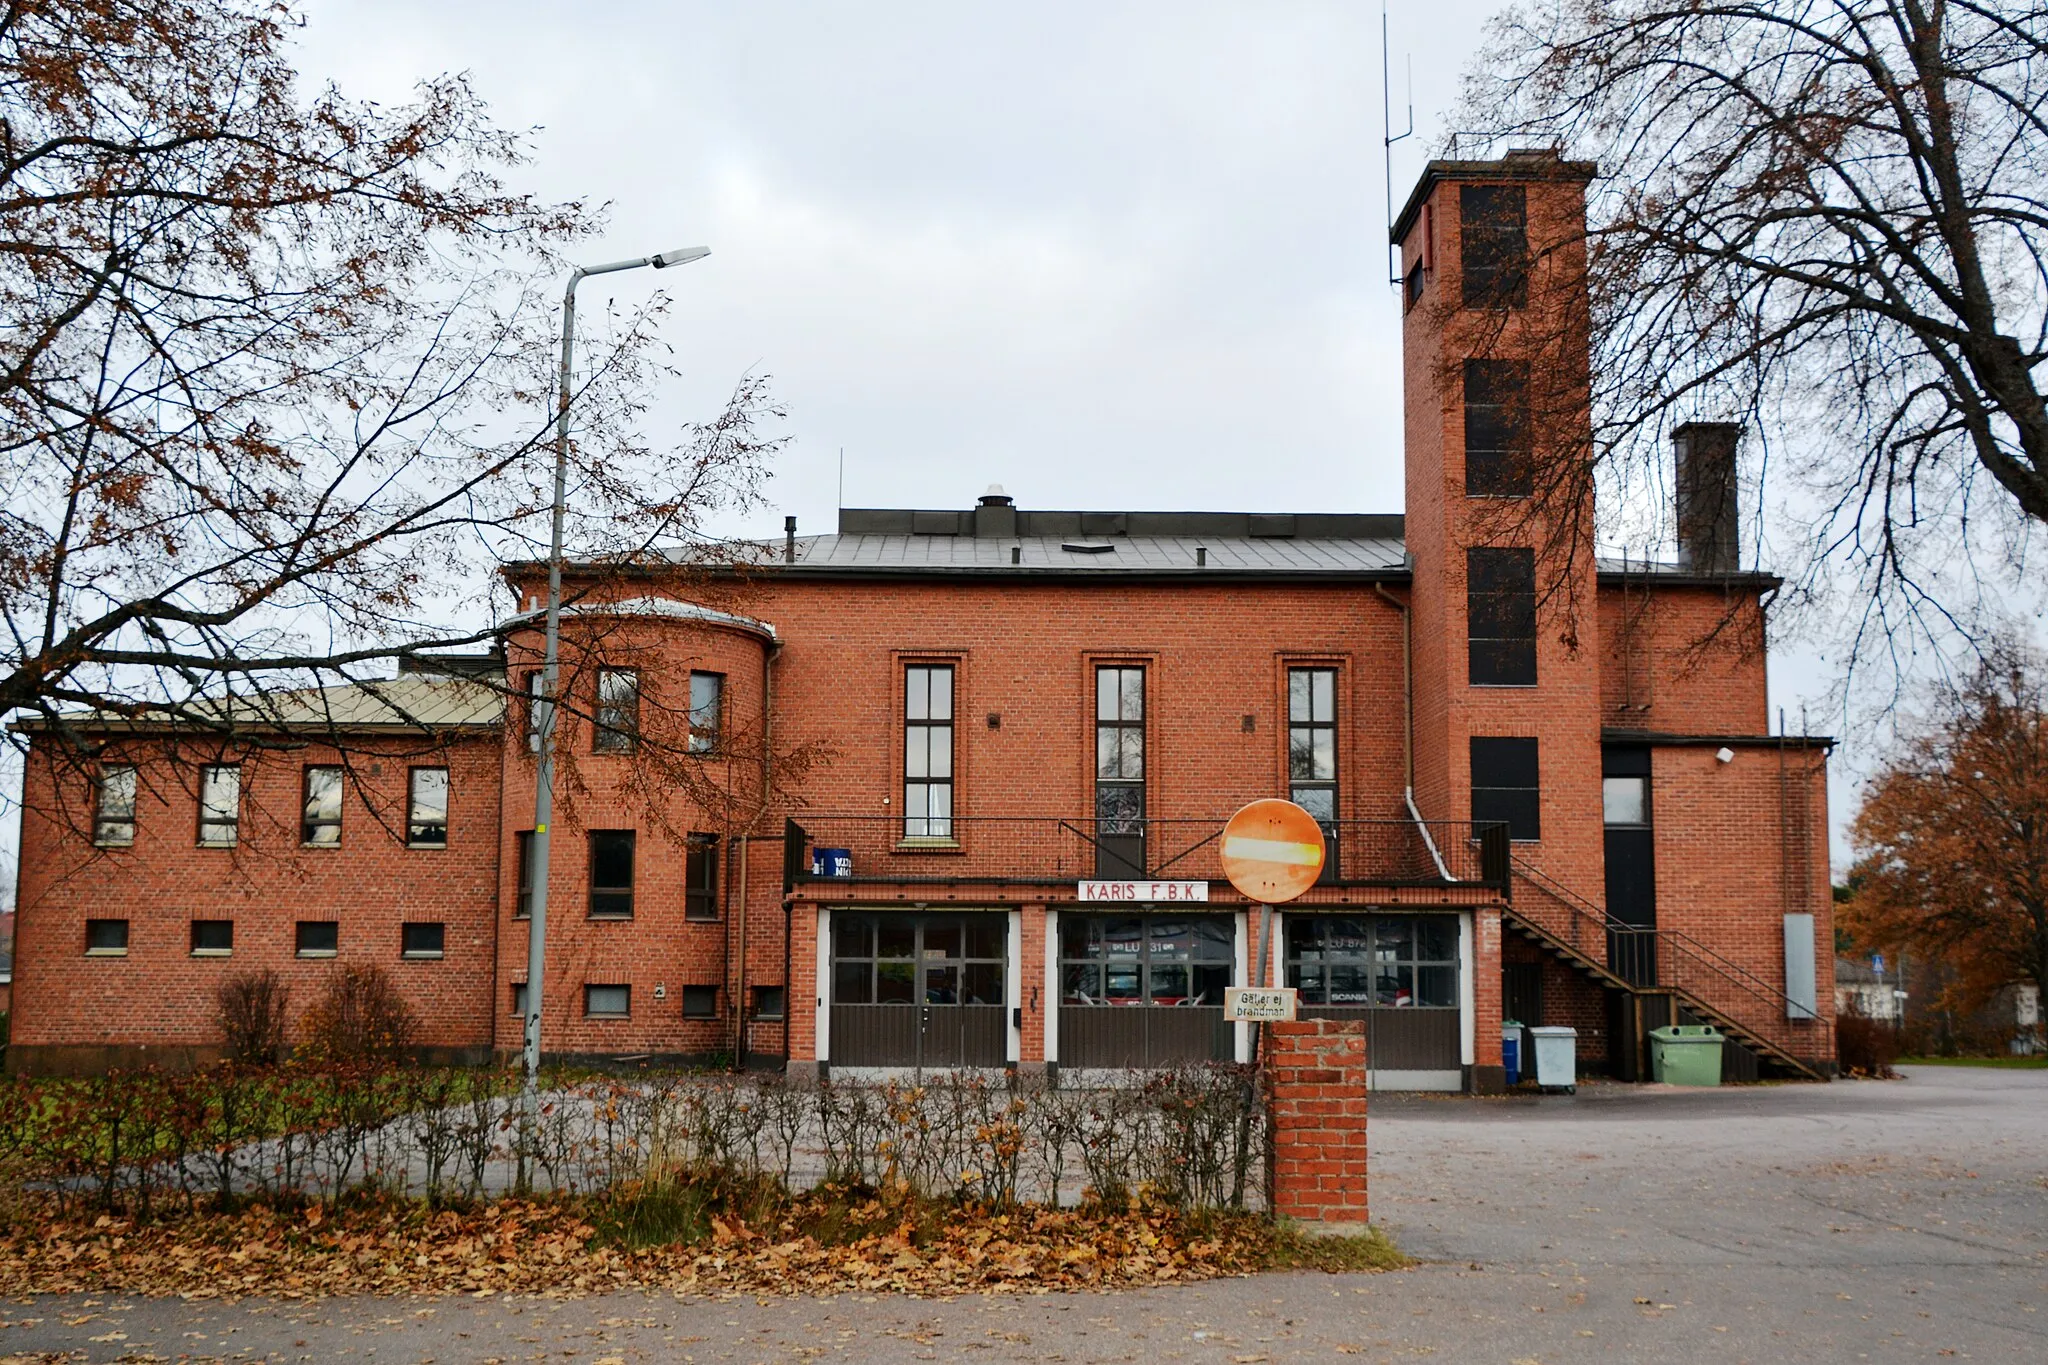 Photo showing: Fire station of the Volunteer fire department in Karis, Raseborg, Finland